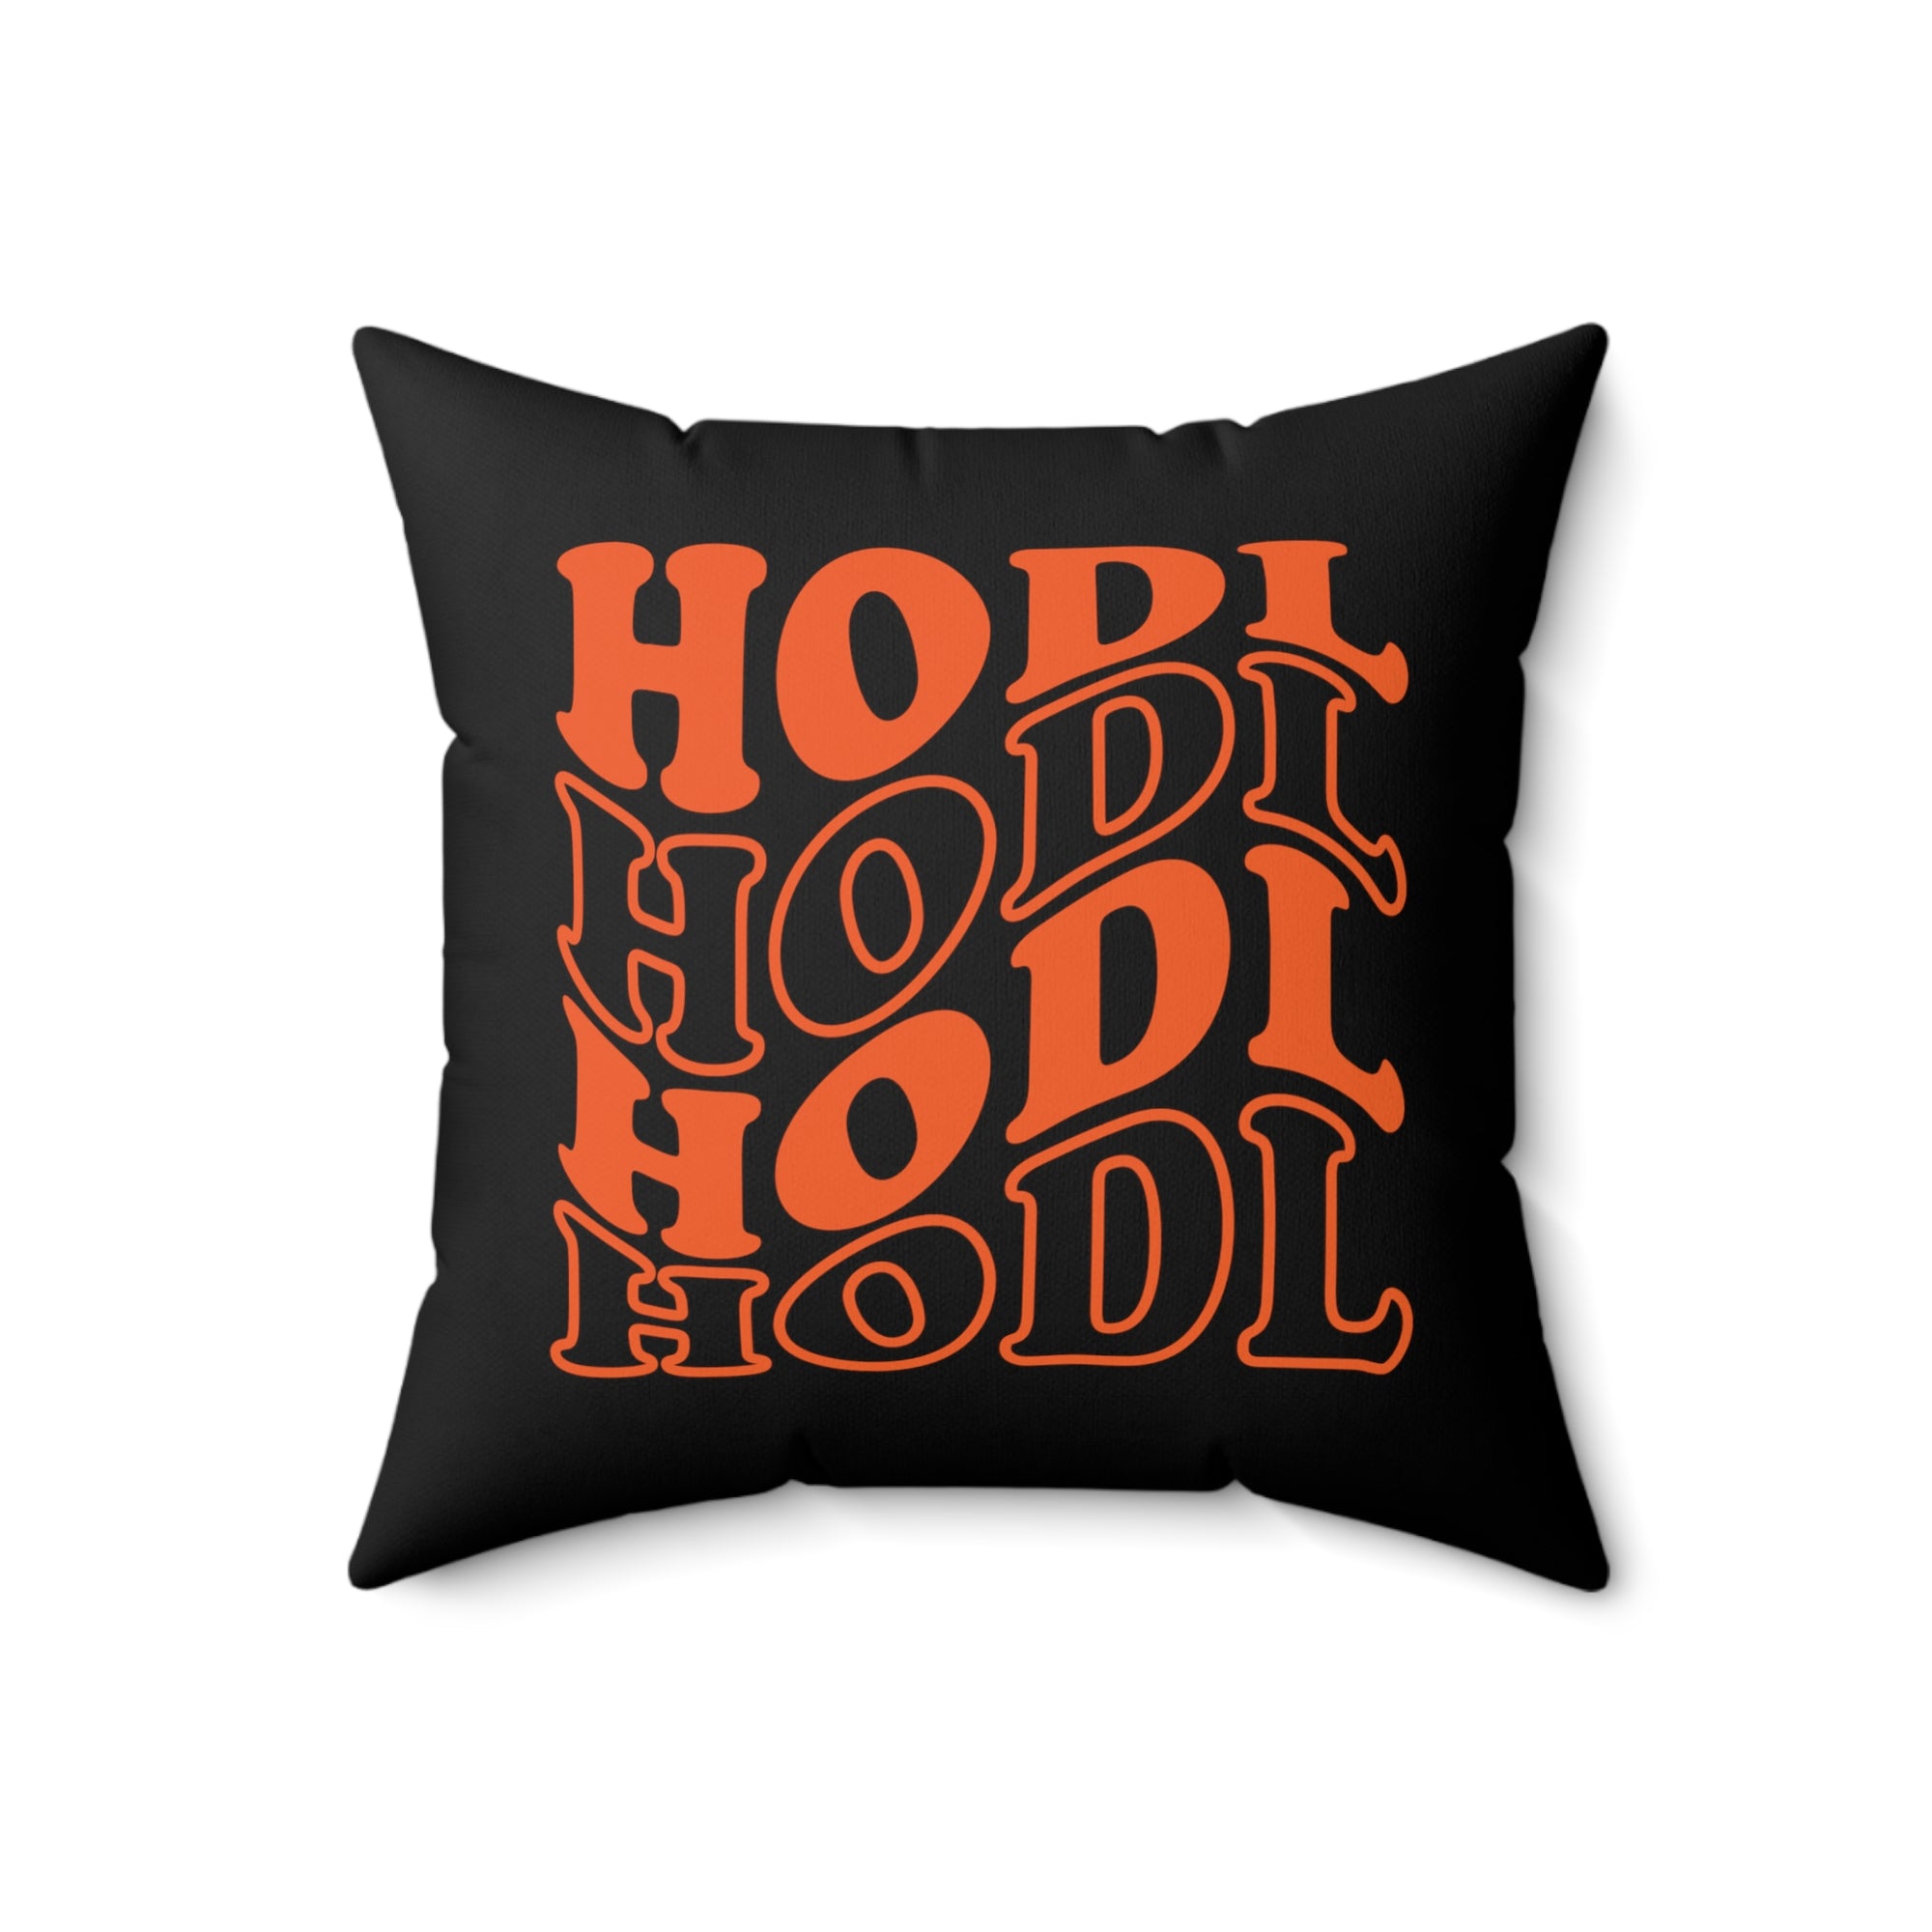 Gifts for Crypto Lovers - HODL Pillow. Front View.